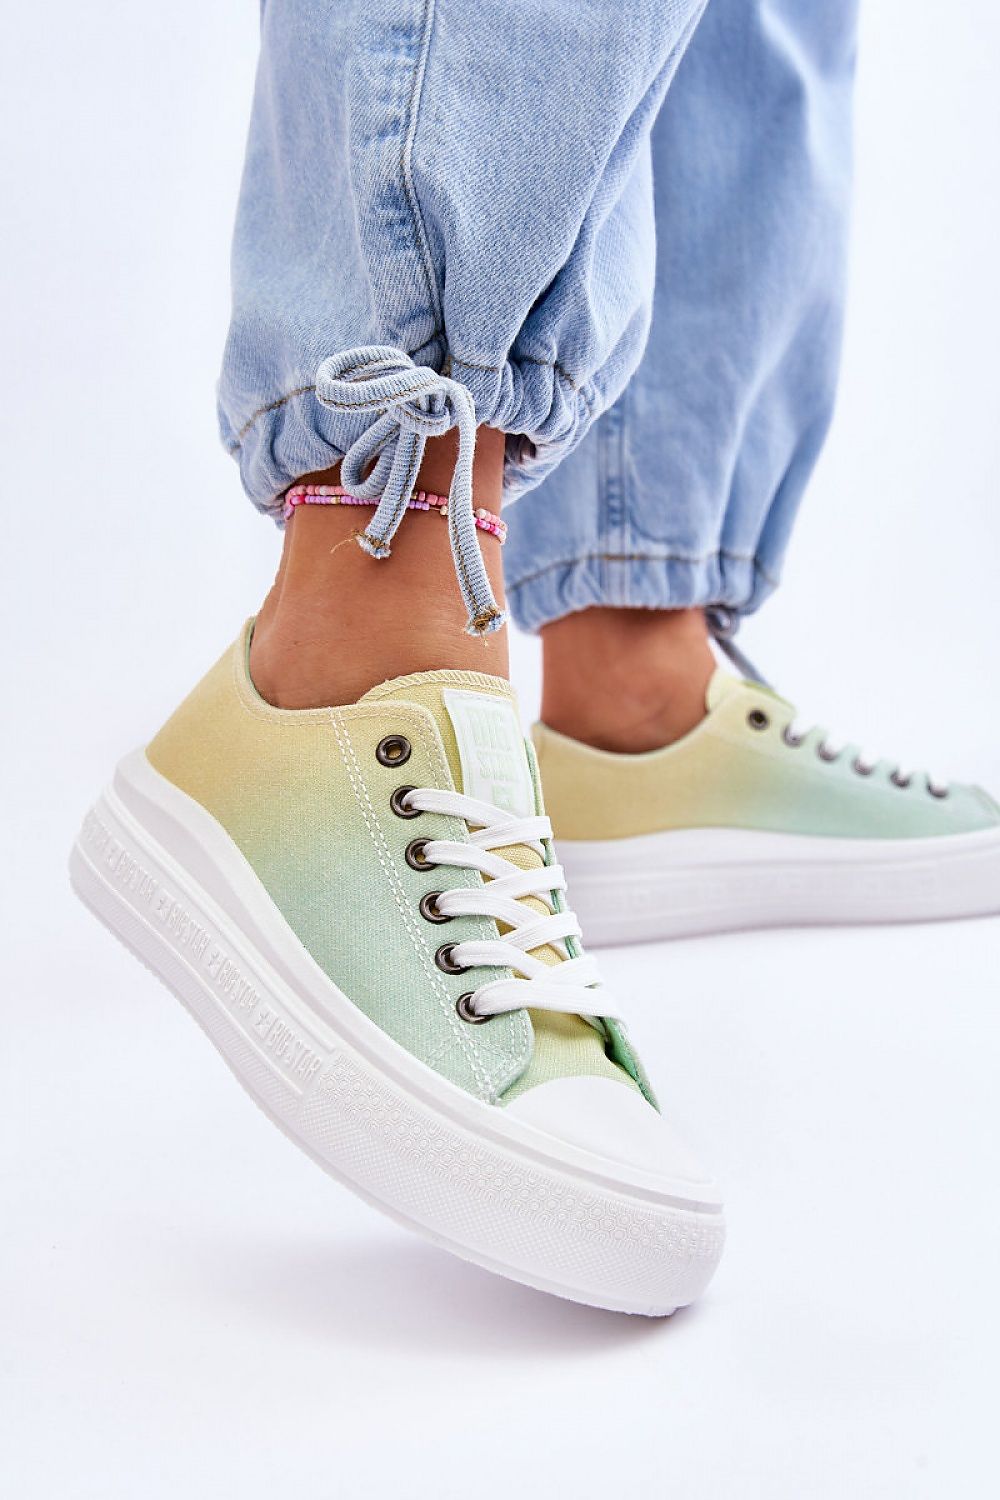 Classic Green Gradient Step in Style Sneakers - US 5.5 - Sport Finesse